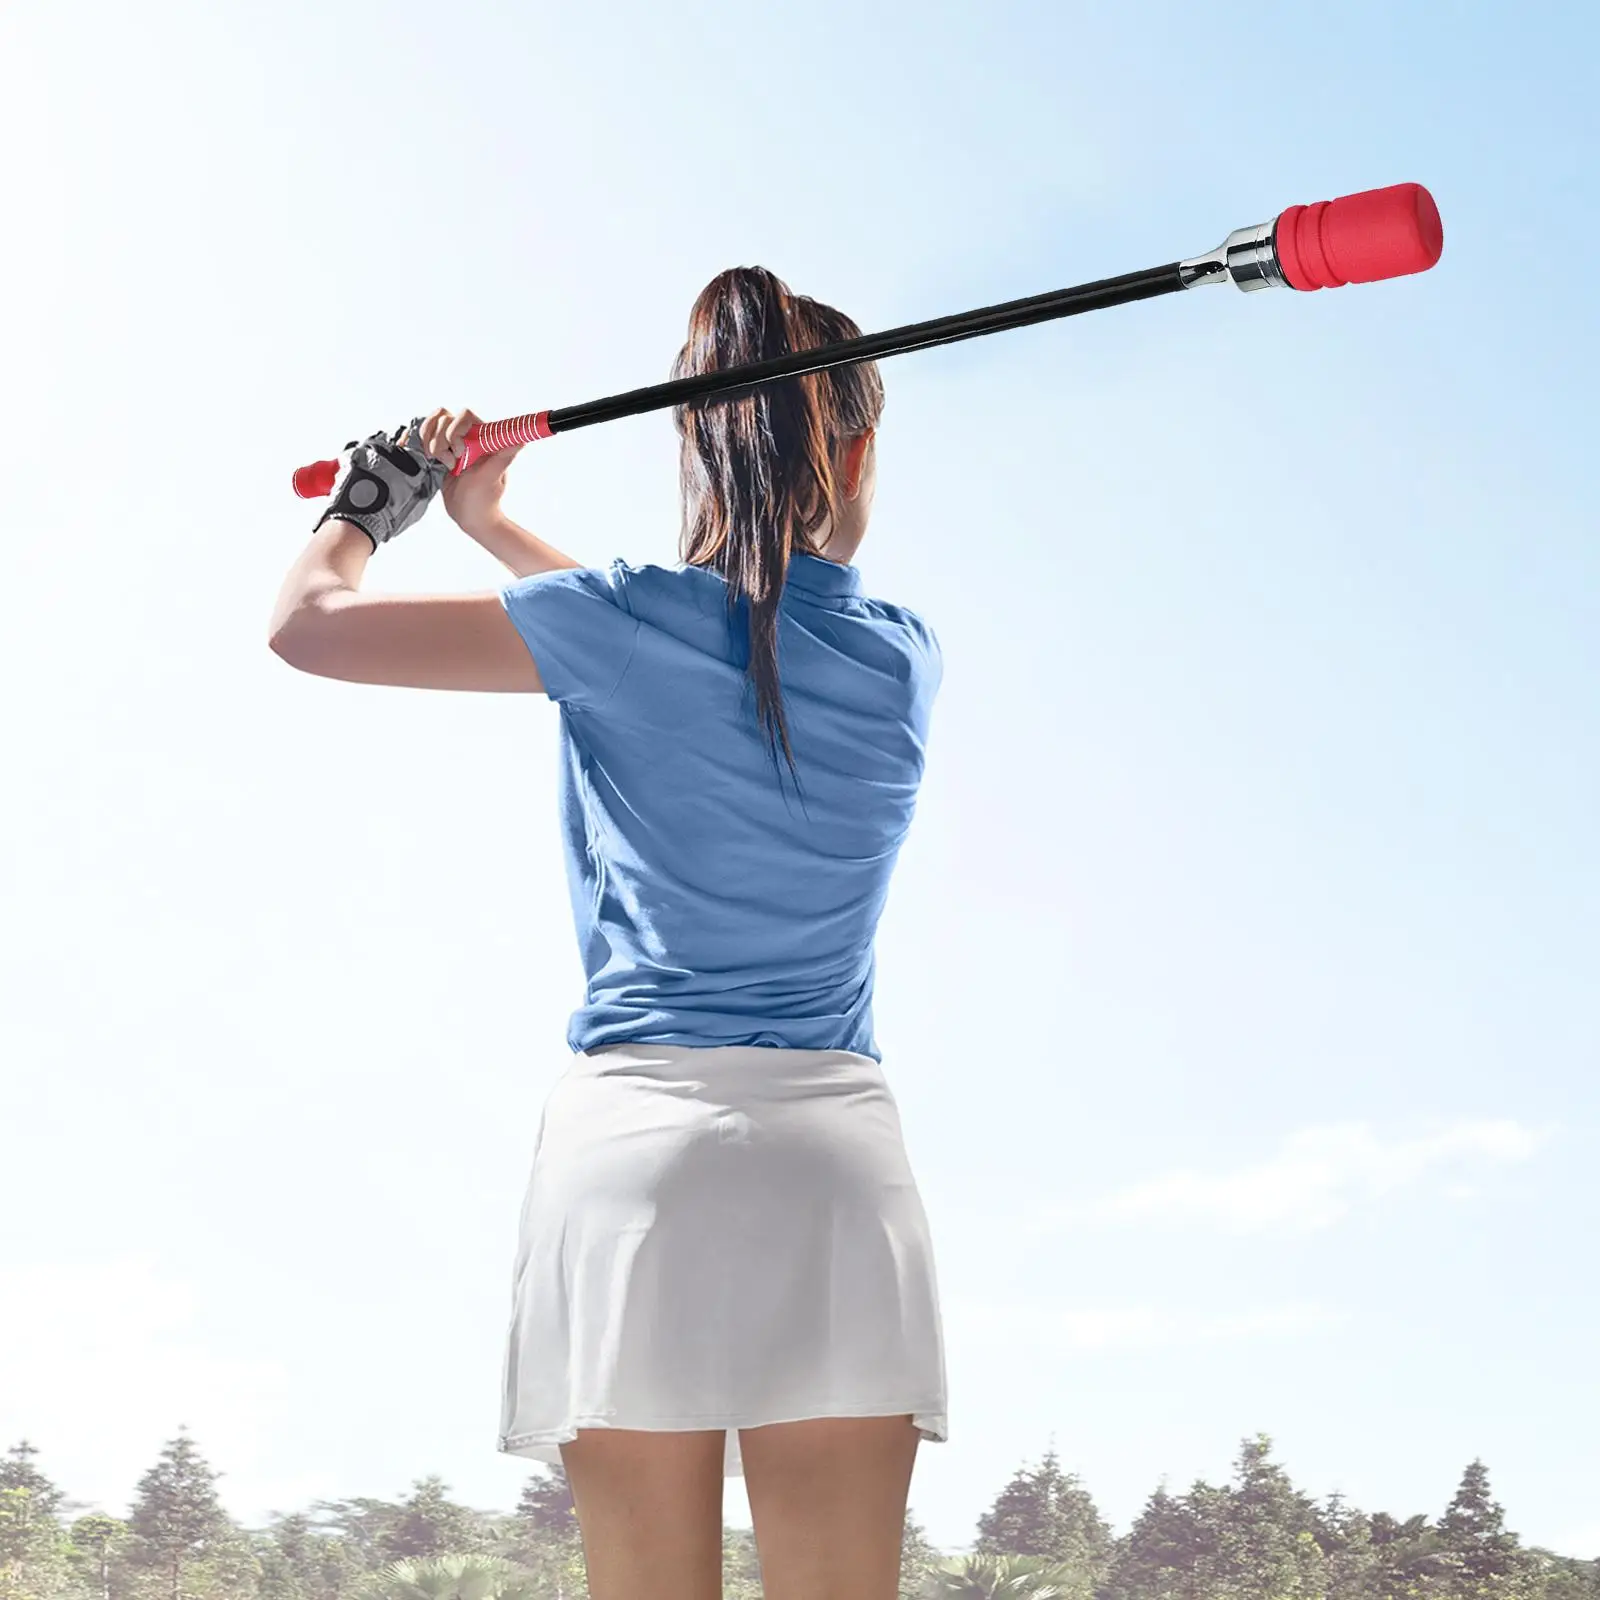 Golf Swing Trainer Flexibility Position Guide Warm up Rod for Position